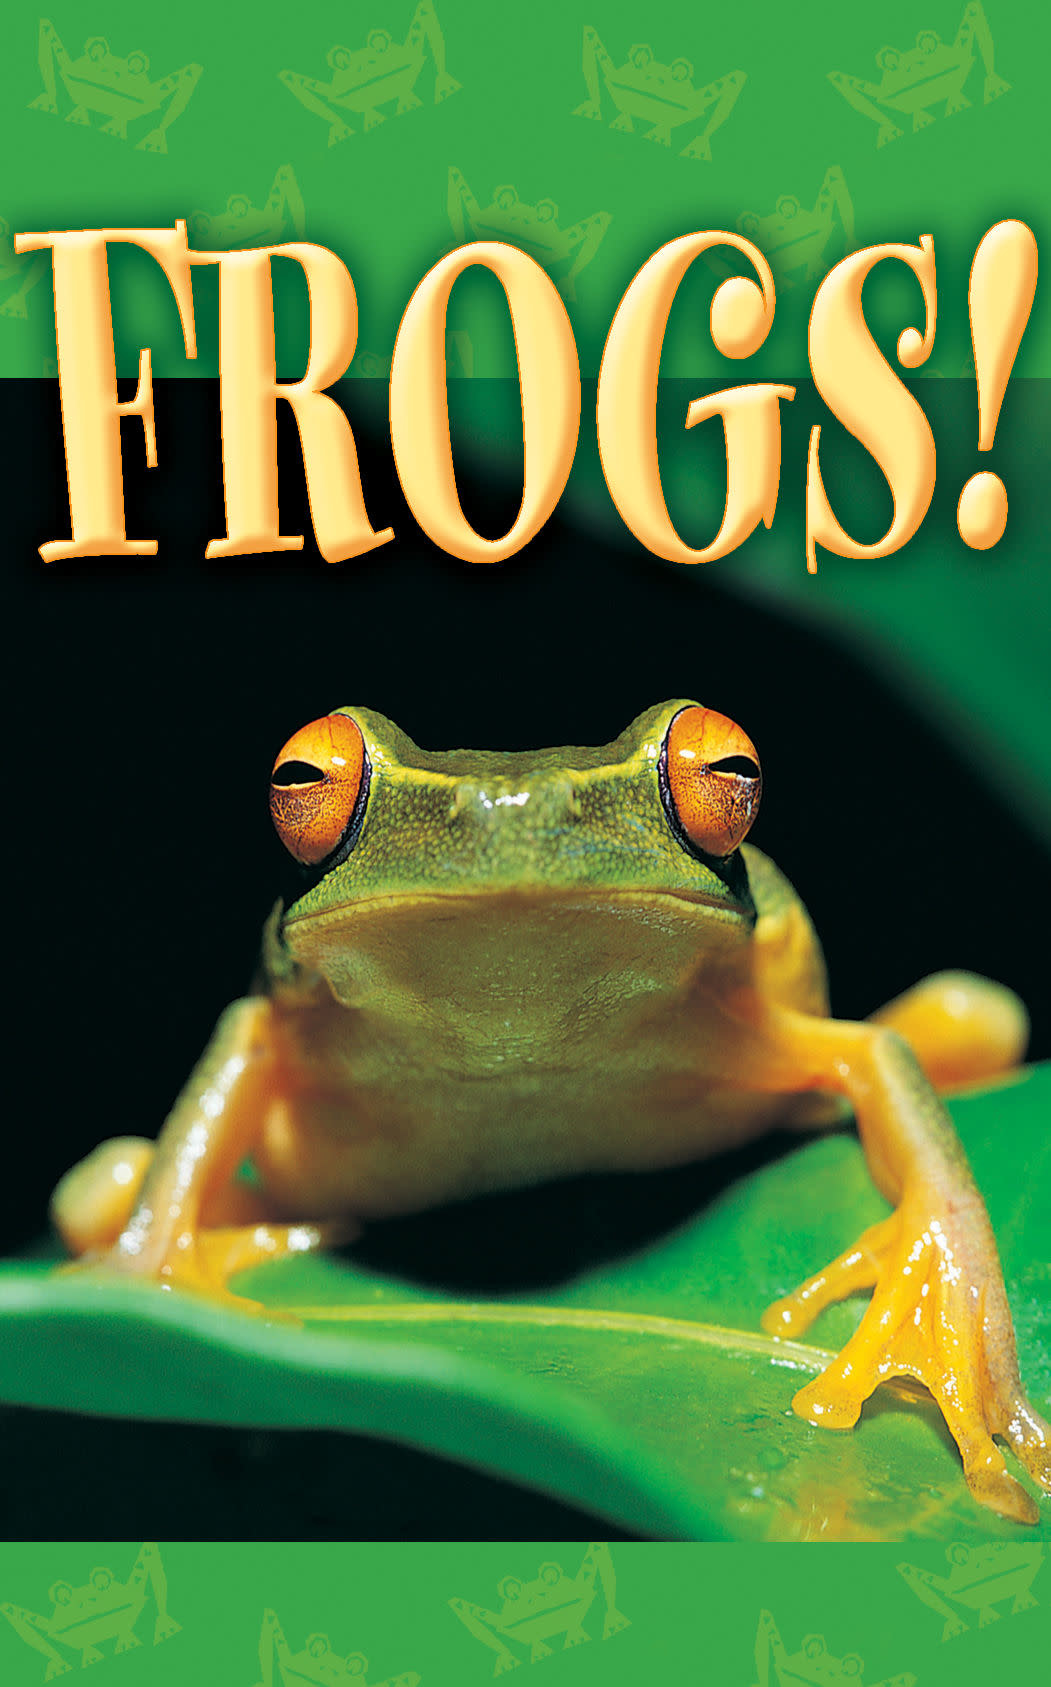 Good News Bulk Tracts: Frogs! - Goodruby Christian Bookstore